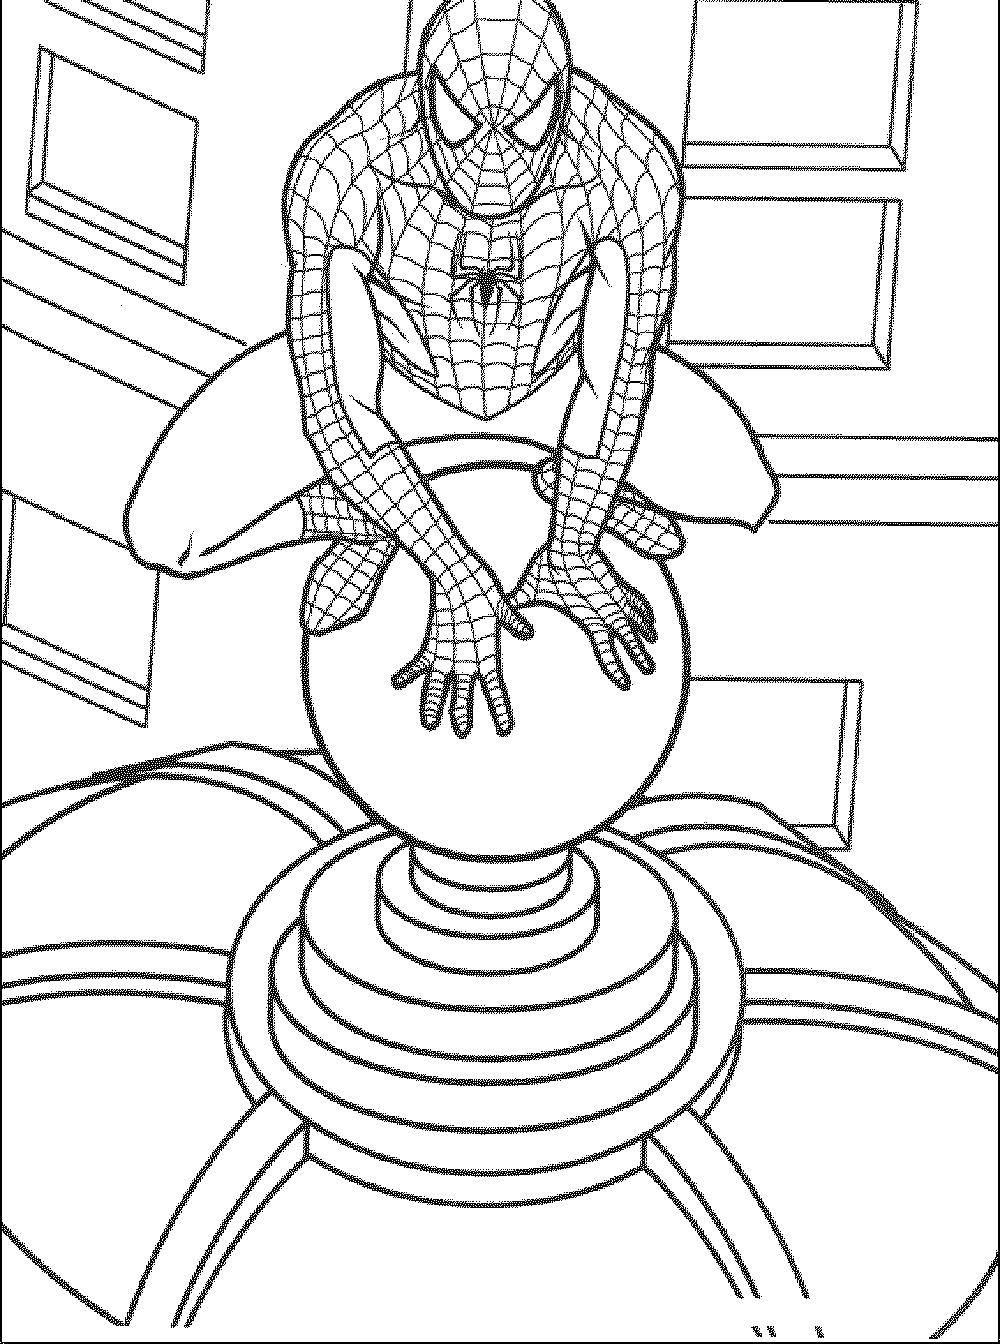 Coloring Spiderman watching the city. Category Comics. Tags:  Comics, Spider-Man, Spider-Man.